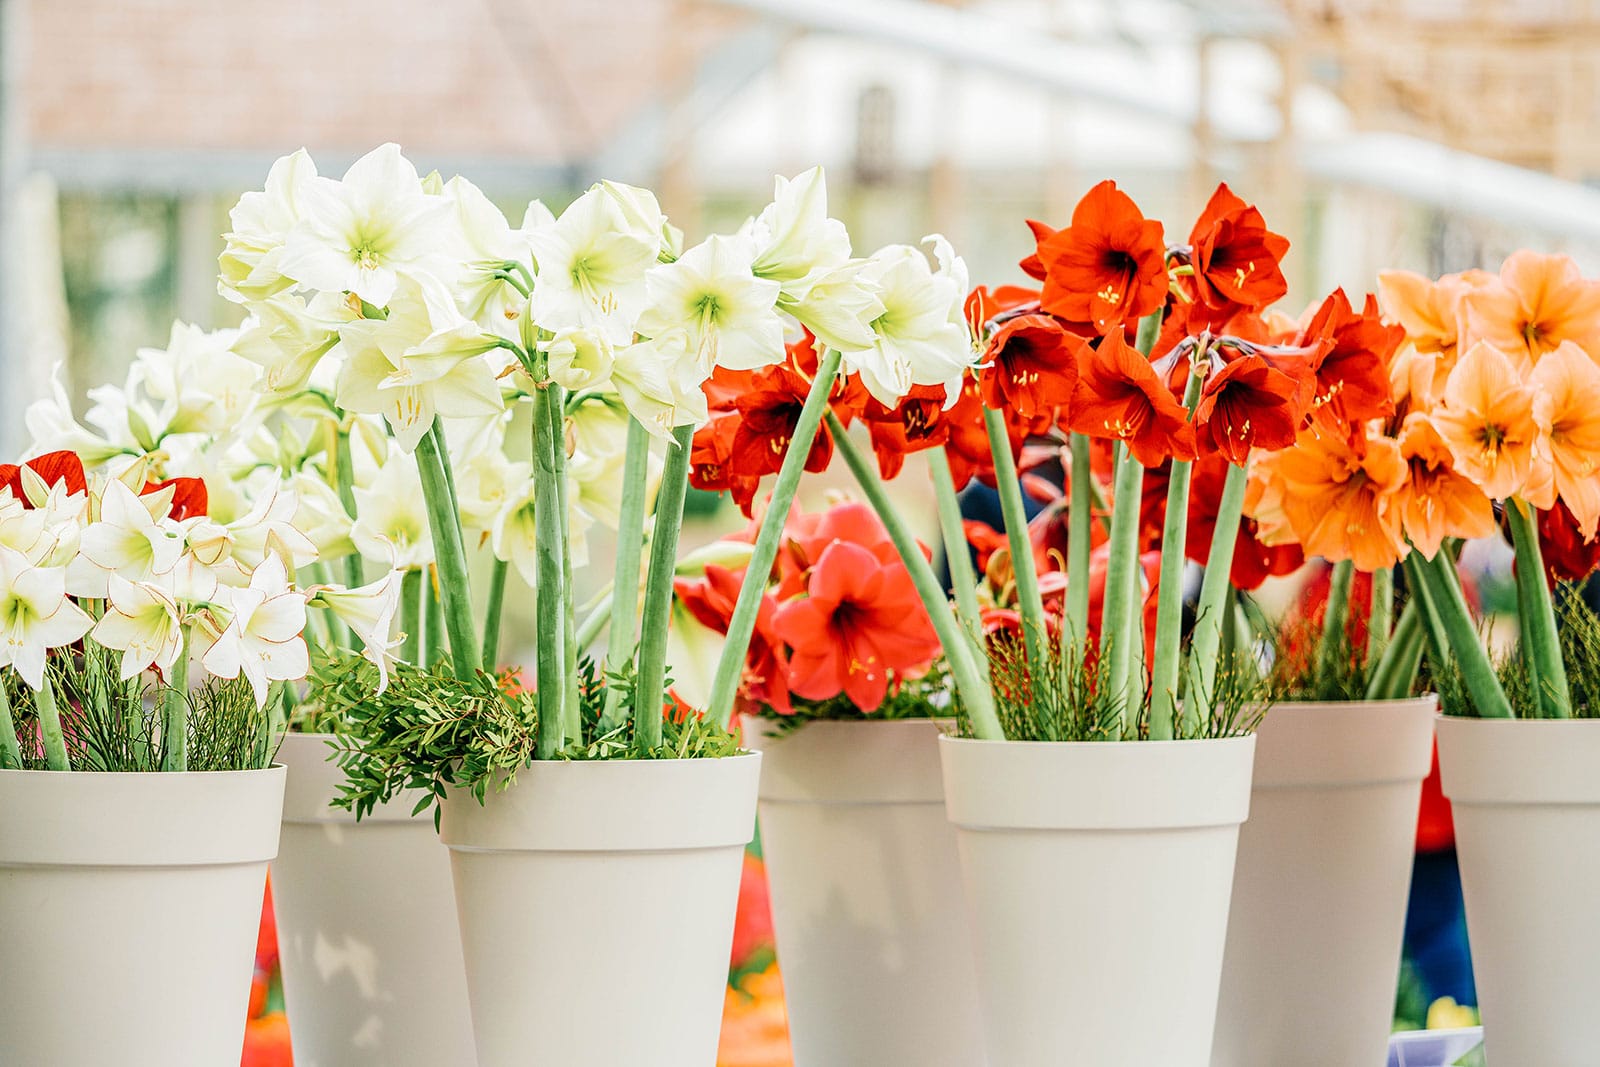 A variety of potted amaryllis (Hippeastrum) in white containers displayed for sale in a plant nursery